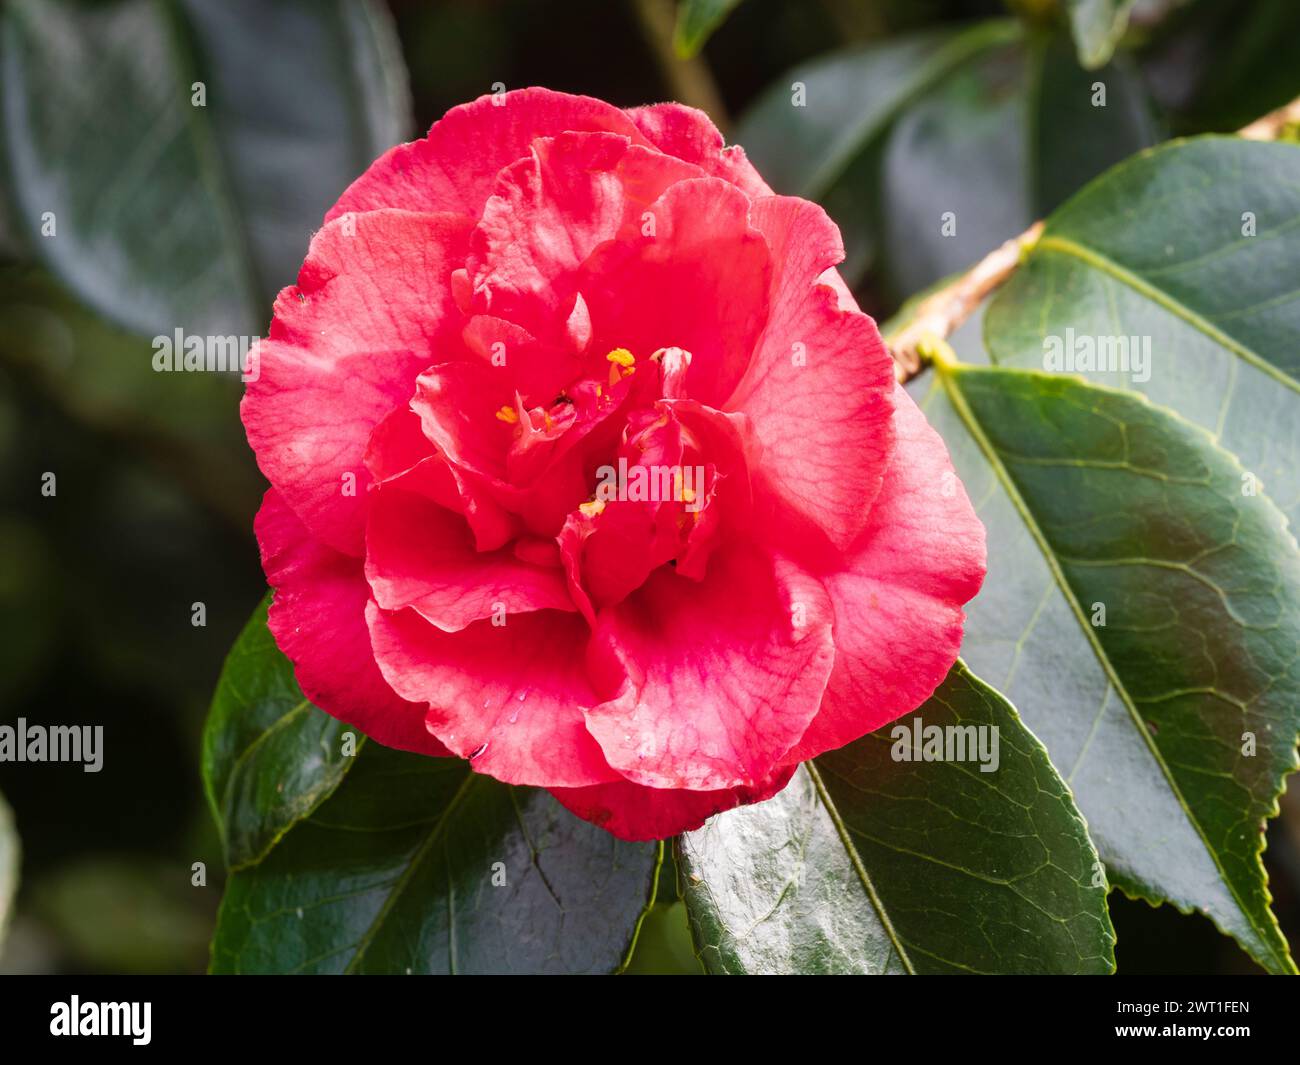 Late winter to early spring flower of the hardy evergreen shrub, Camellia japonica 'Elegans' Stock Photo